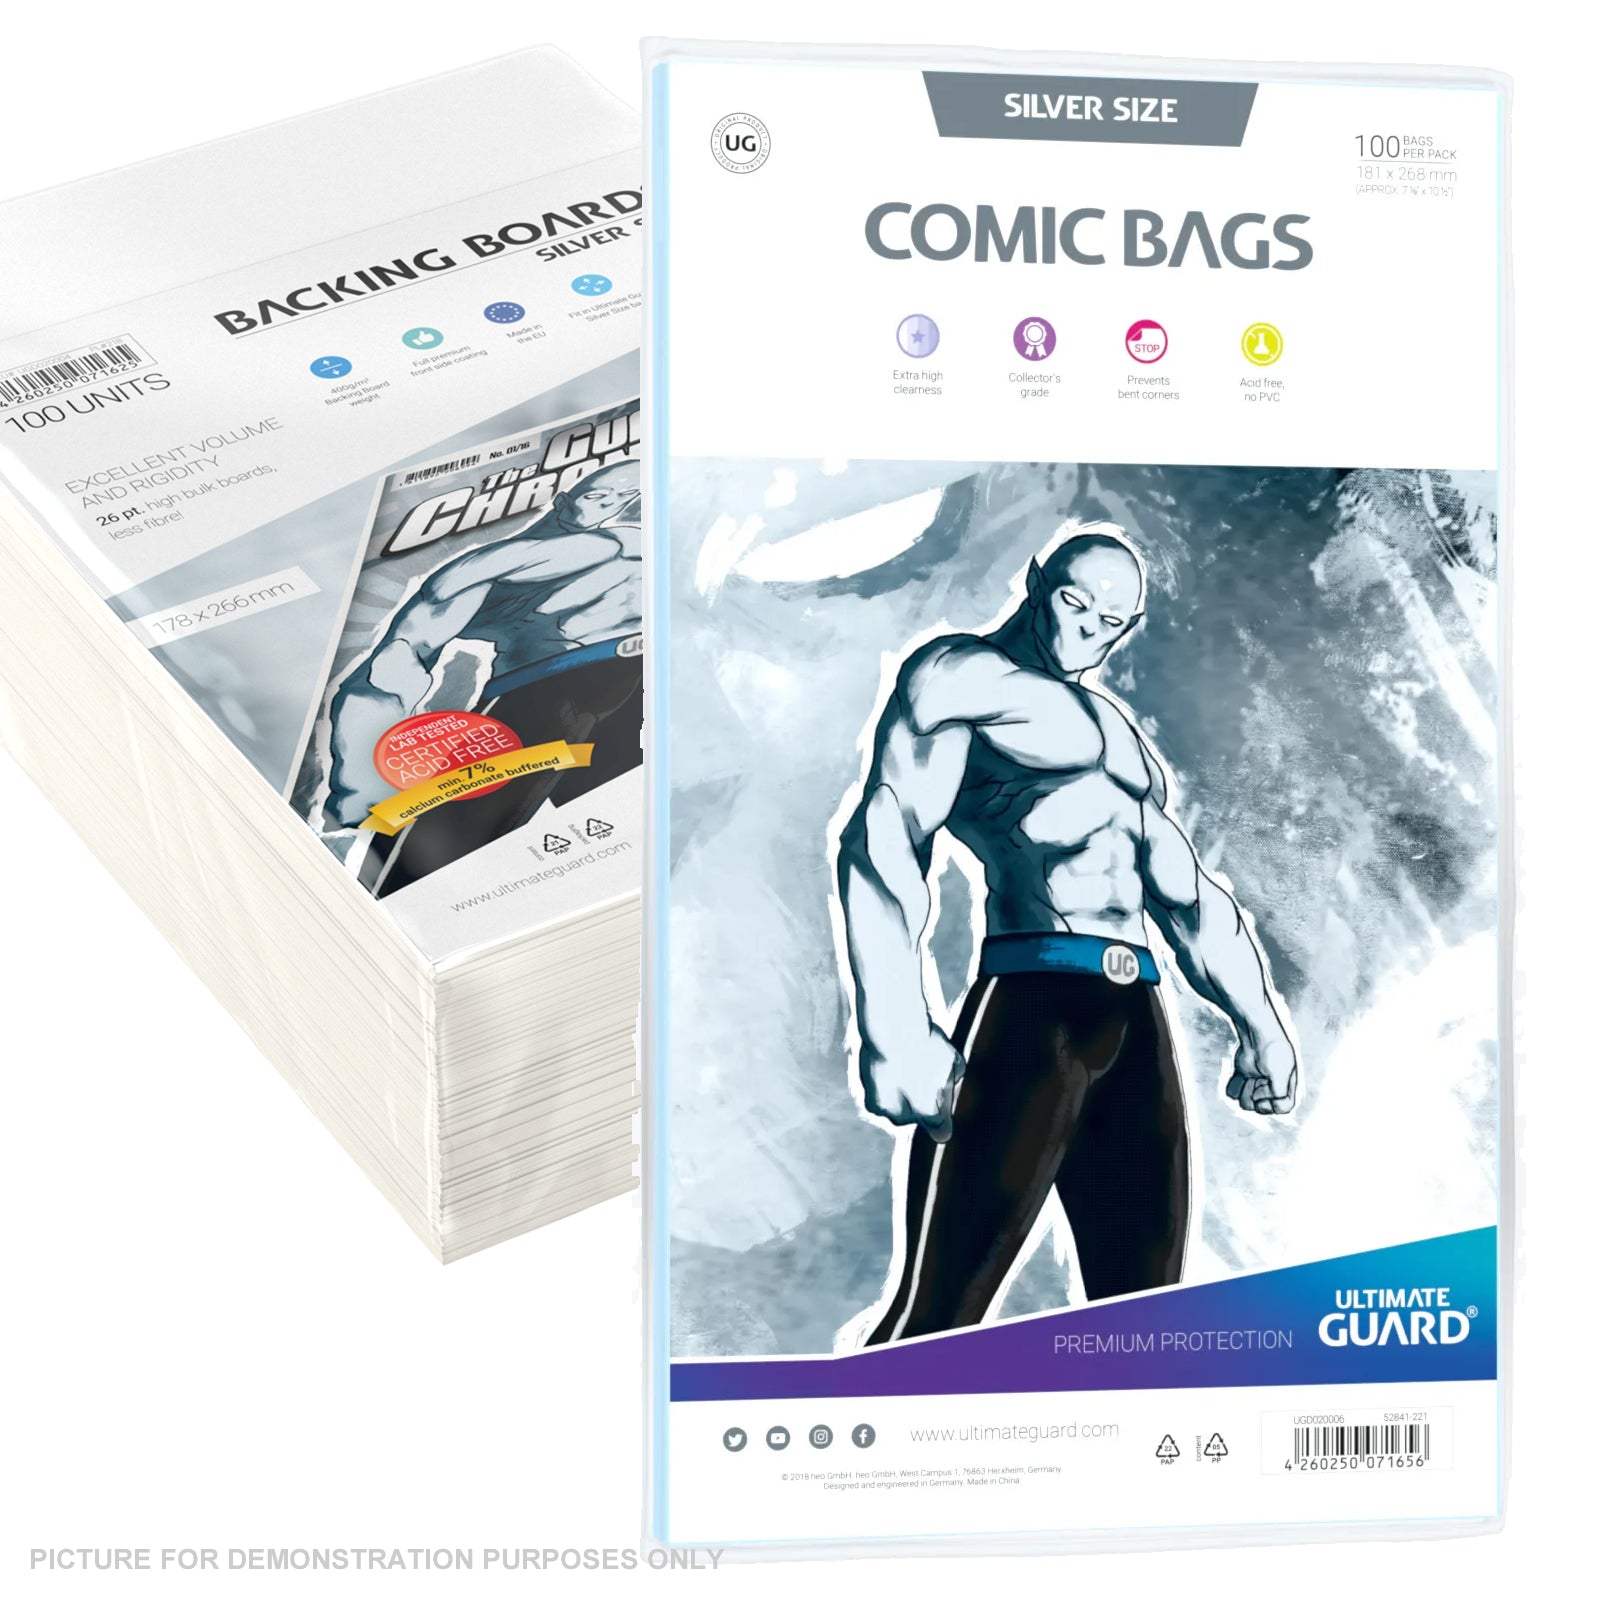 COMIC COMBO - ULTIMATE GUARD - Standard SILVER Size Comic Bags & Backing Boards x 100